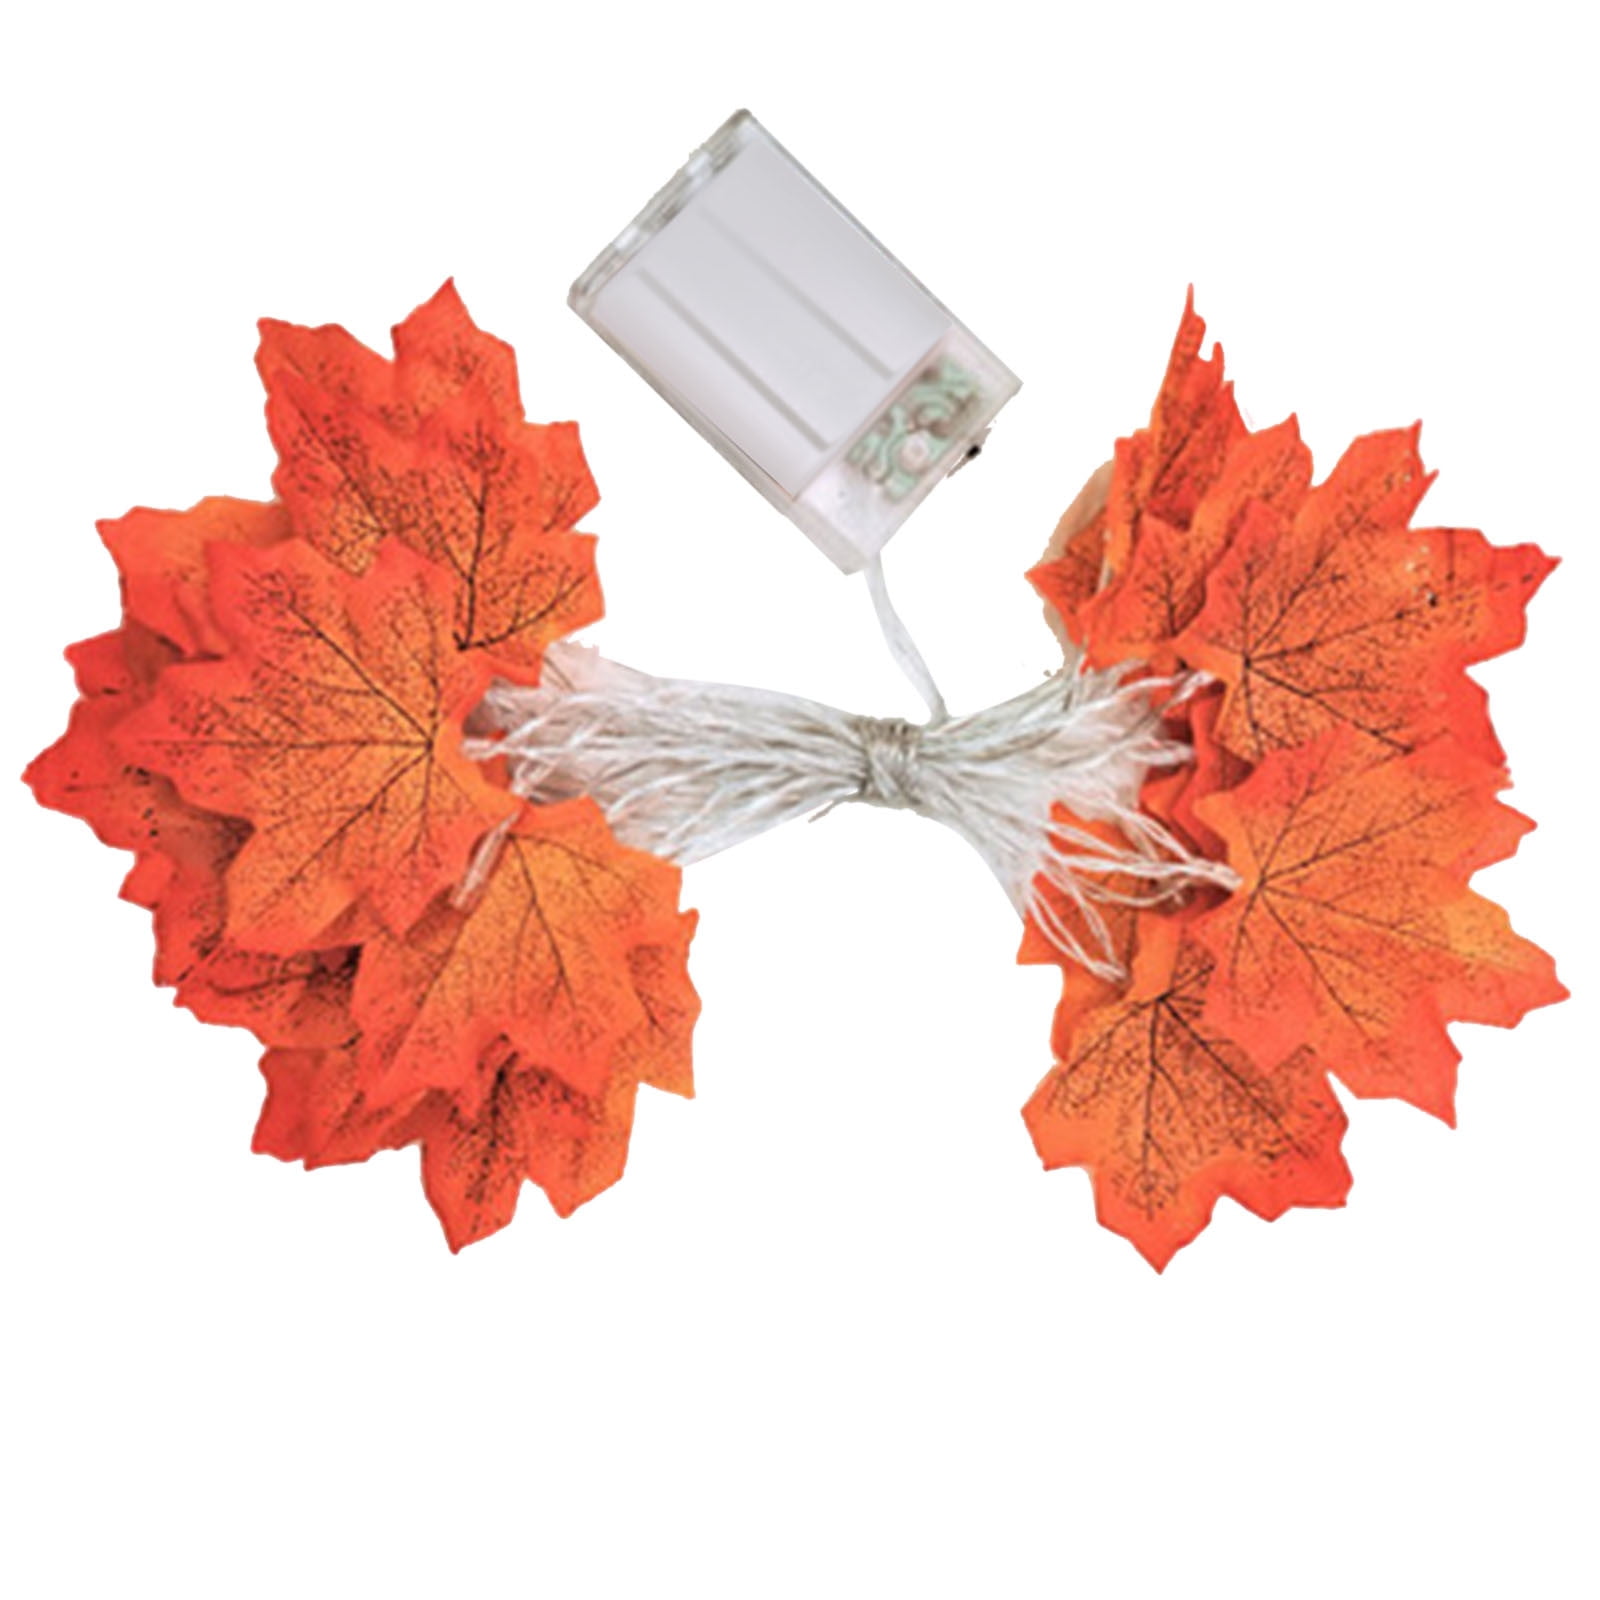 PVCS 400M 40LED Lighted Fall Autumn Maple Leaves Garland Party Bedroom ...